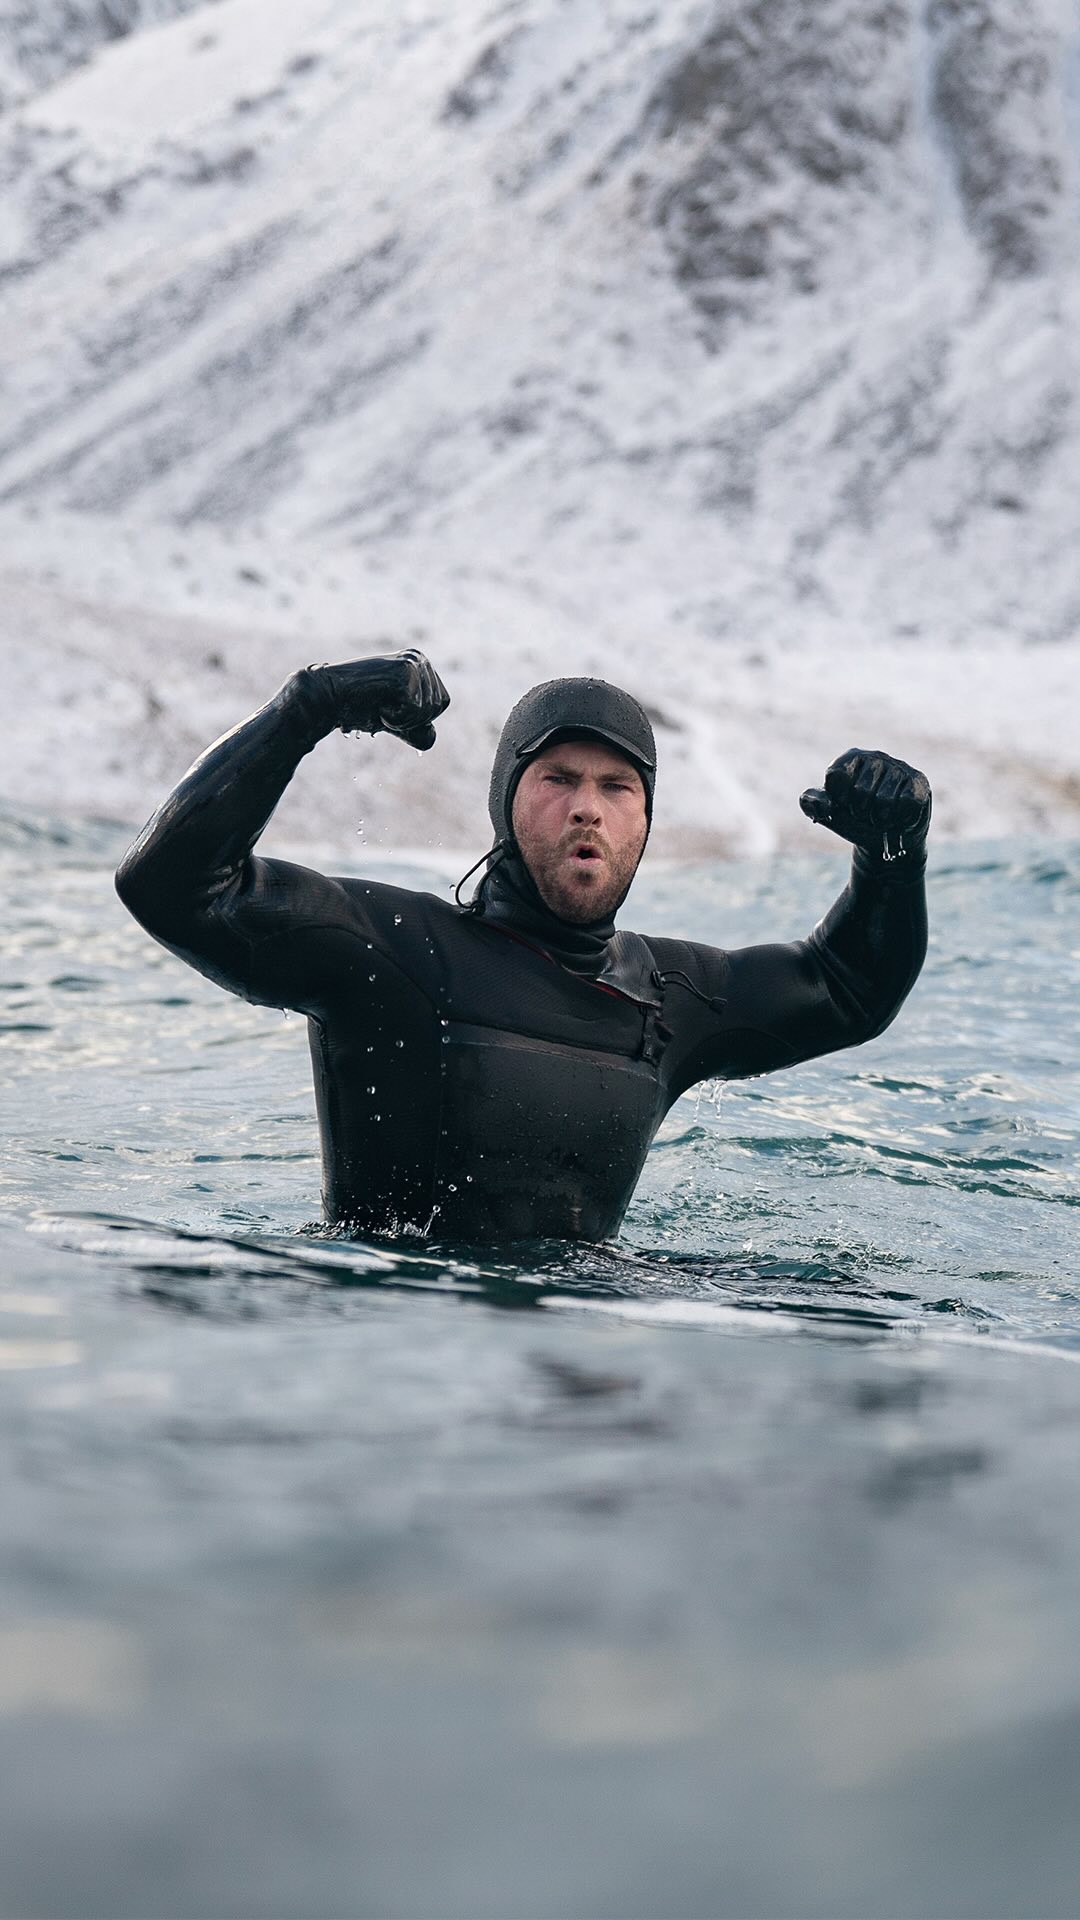 How far would you go to live a longer, healthier life? See how far I went on #LimitlesswithChrisHemsworth, episodes 1-3 are now streaming on @Hulu until 12/26, and coming to @NatGeo Dec 18. Check it out now!